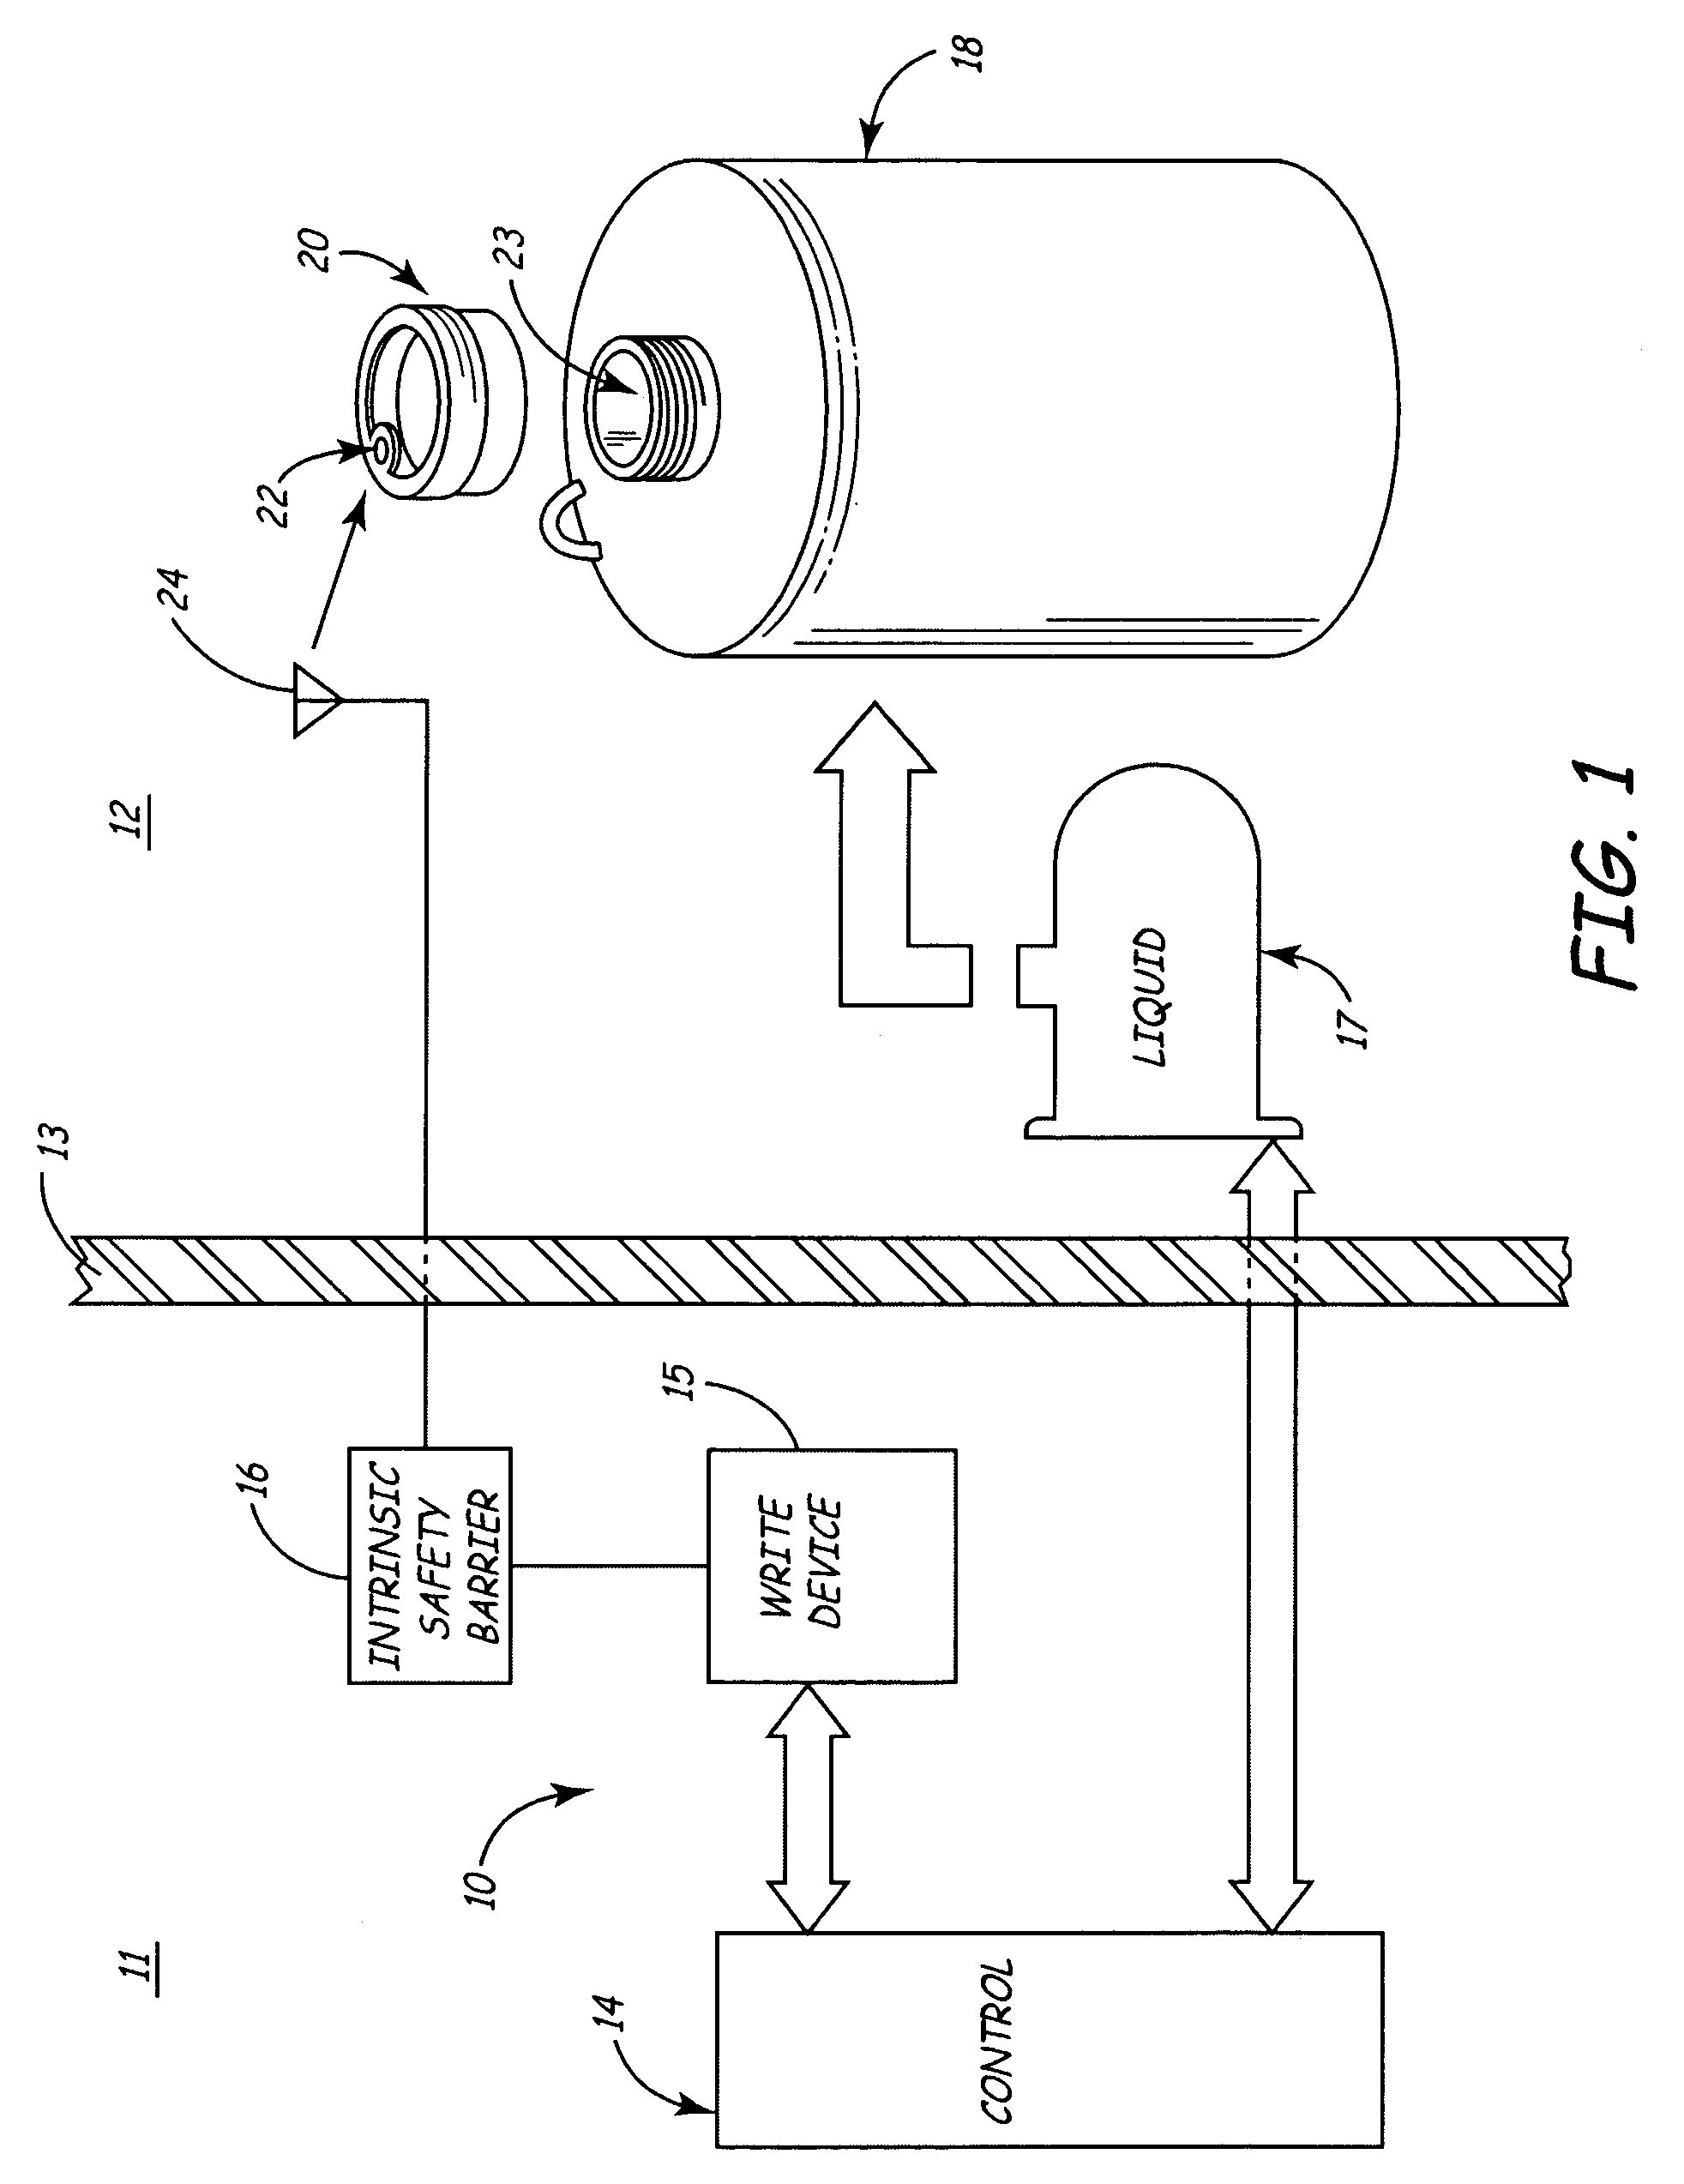 Manufacturing system with intrinsically safe electric information storage